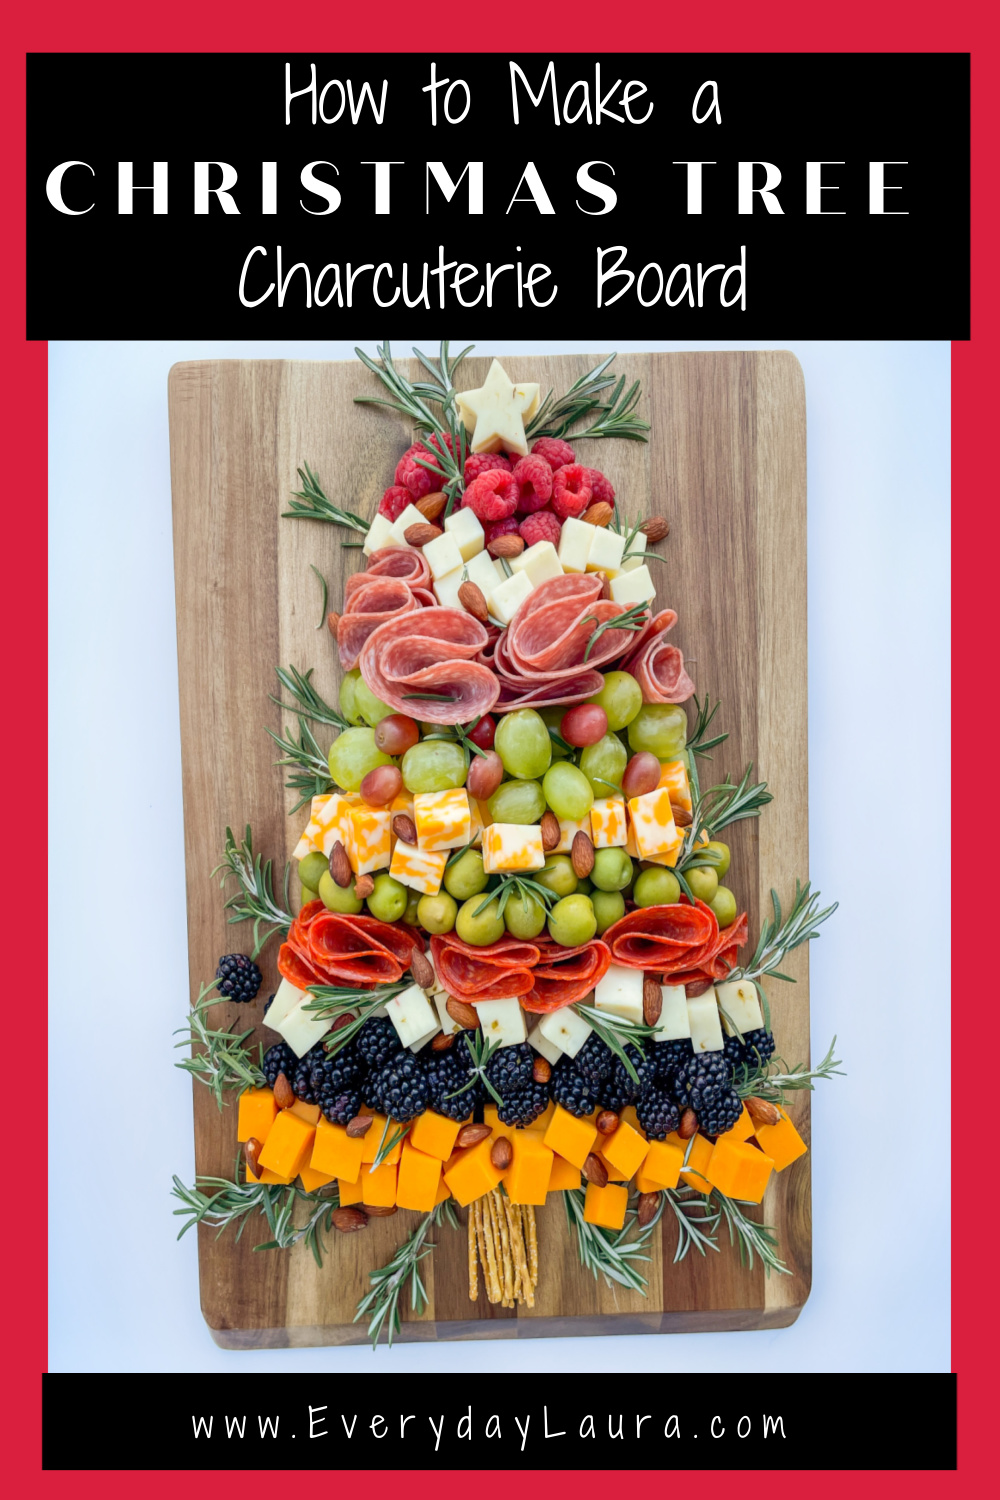 How to make a Christmas tree charcuterie board platter